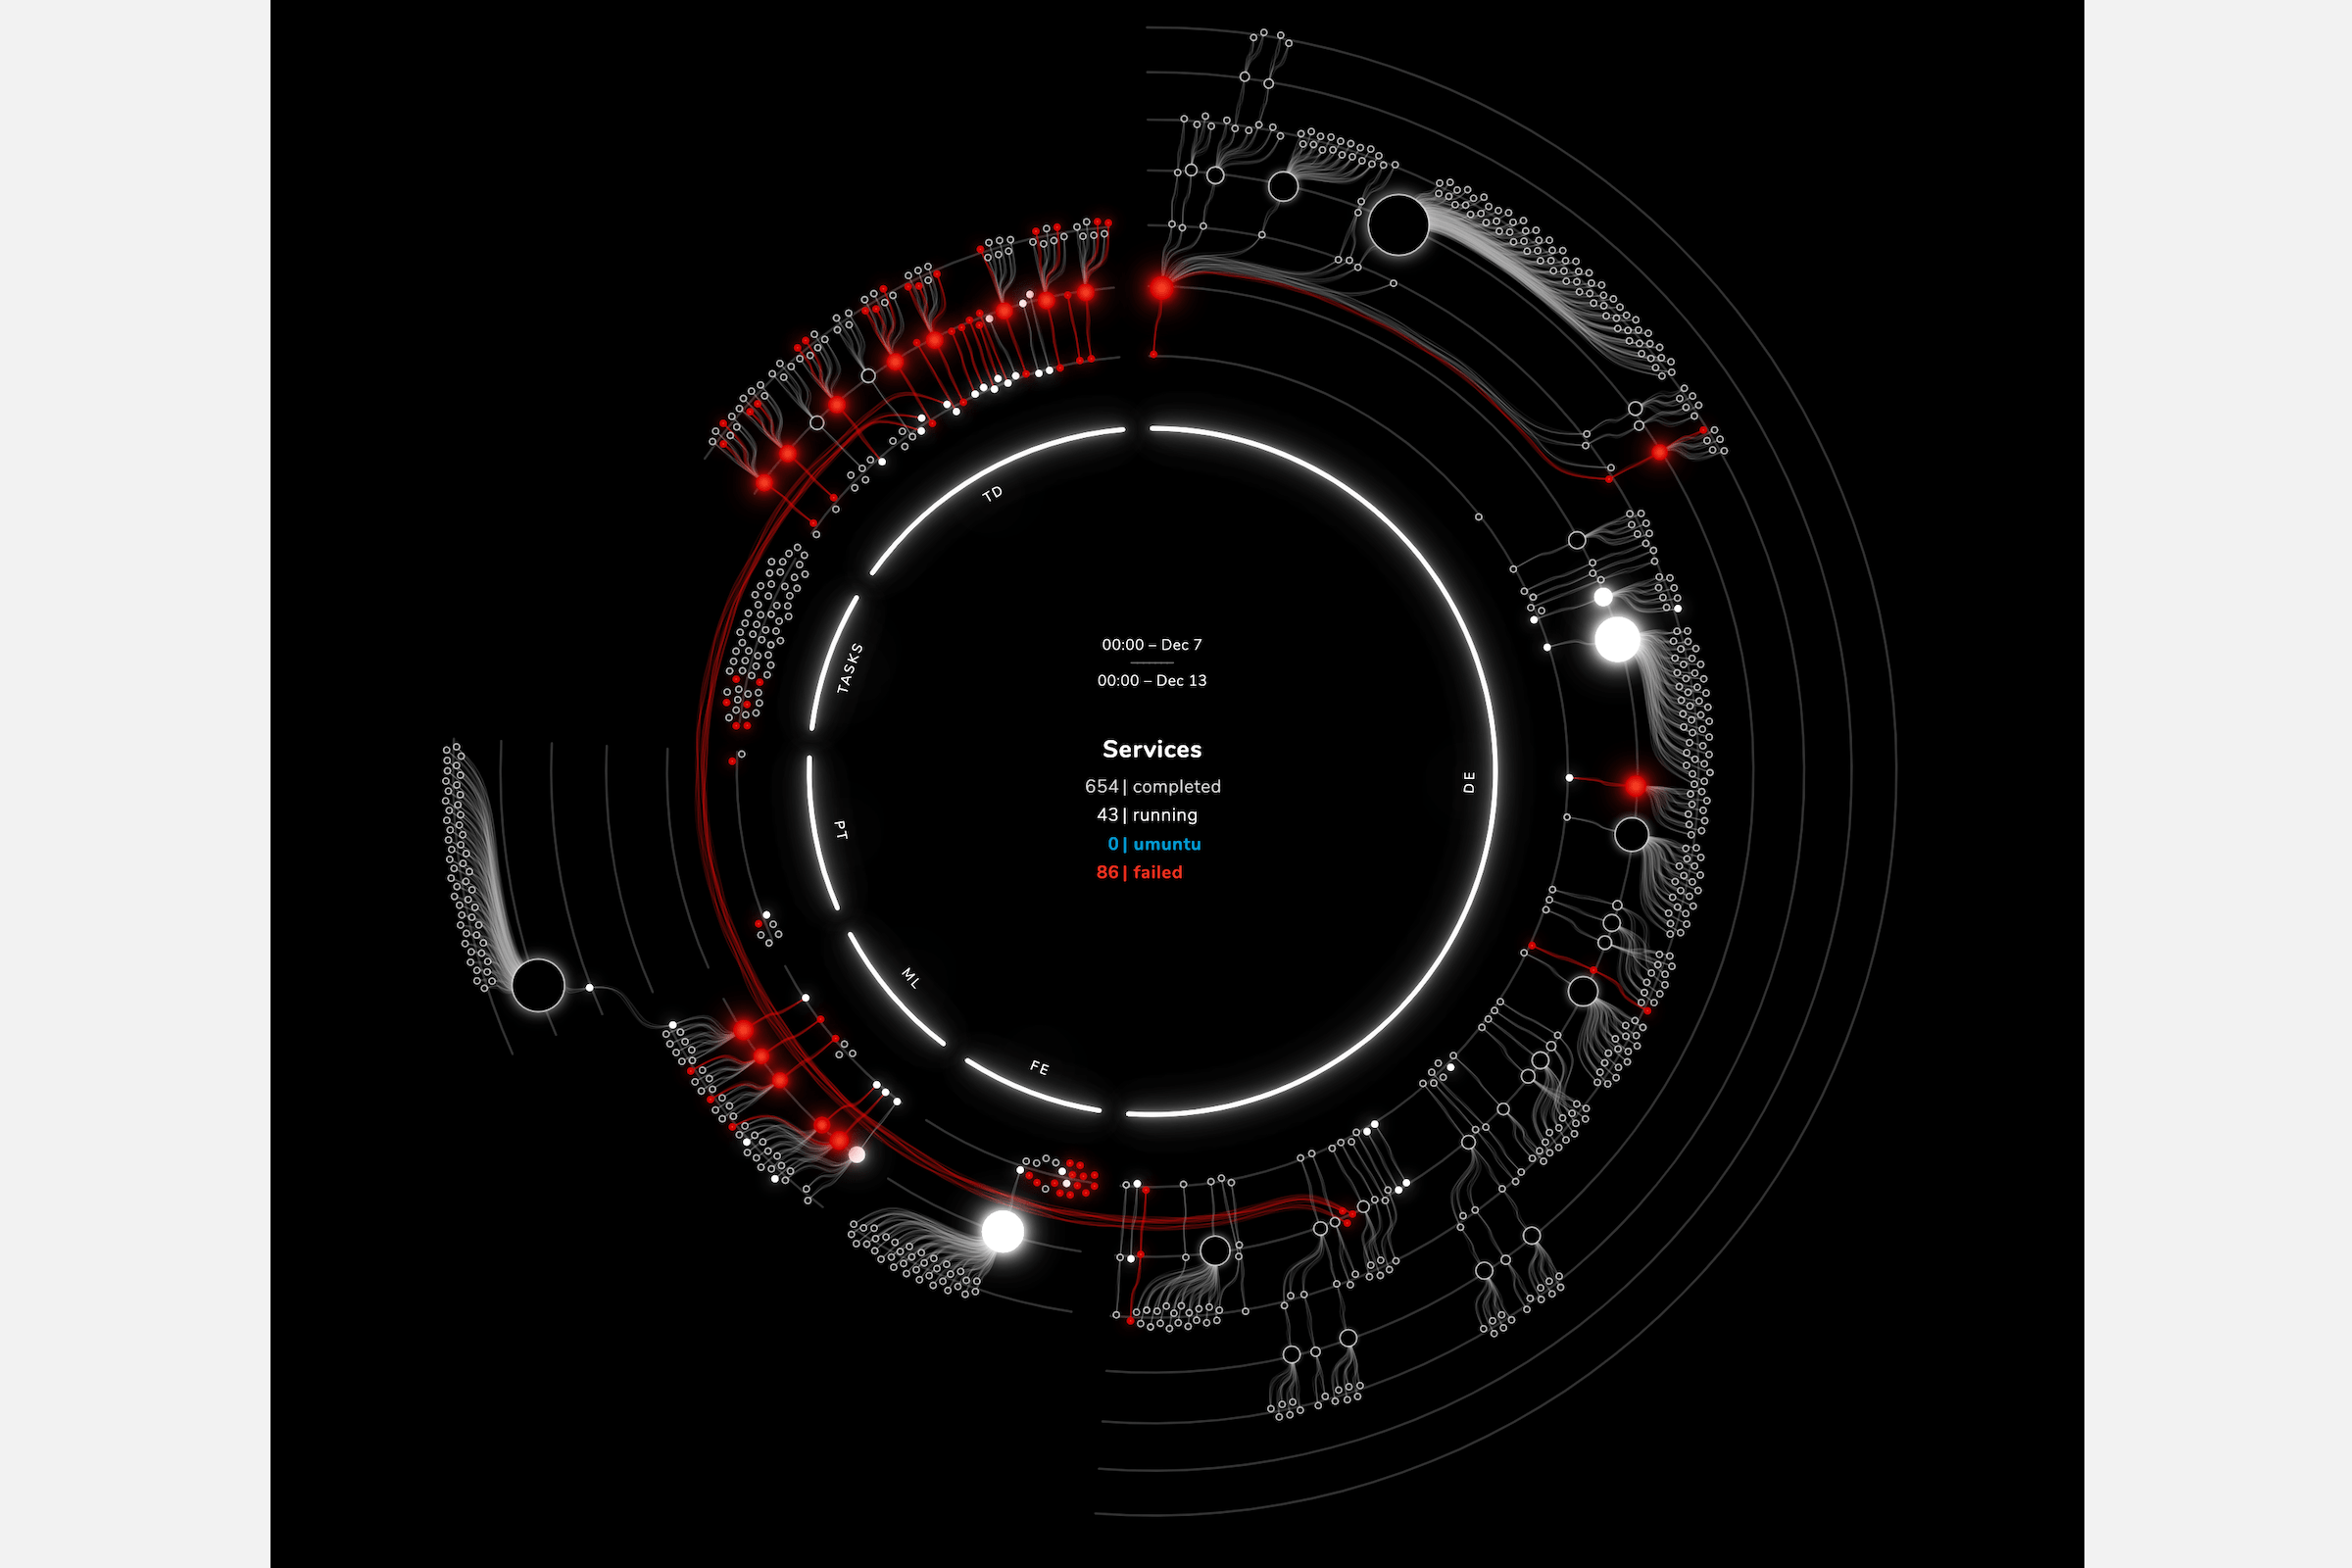 The 'depth circle' showing all the services that ran during a certain period and their connections